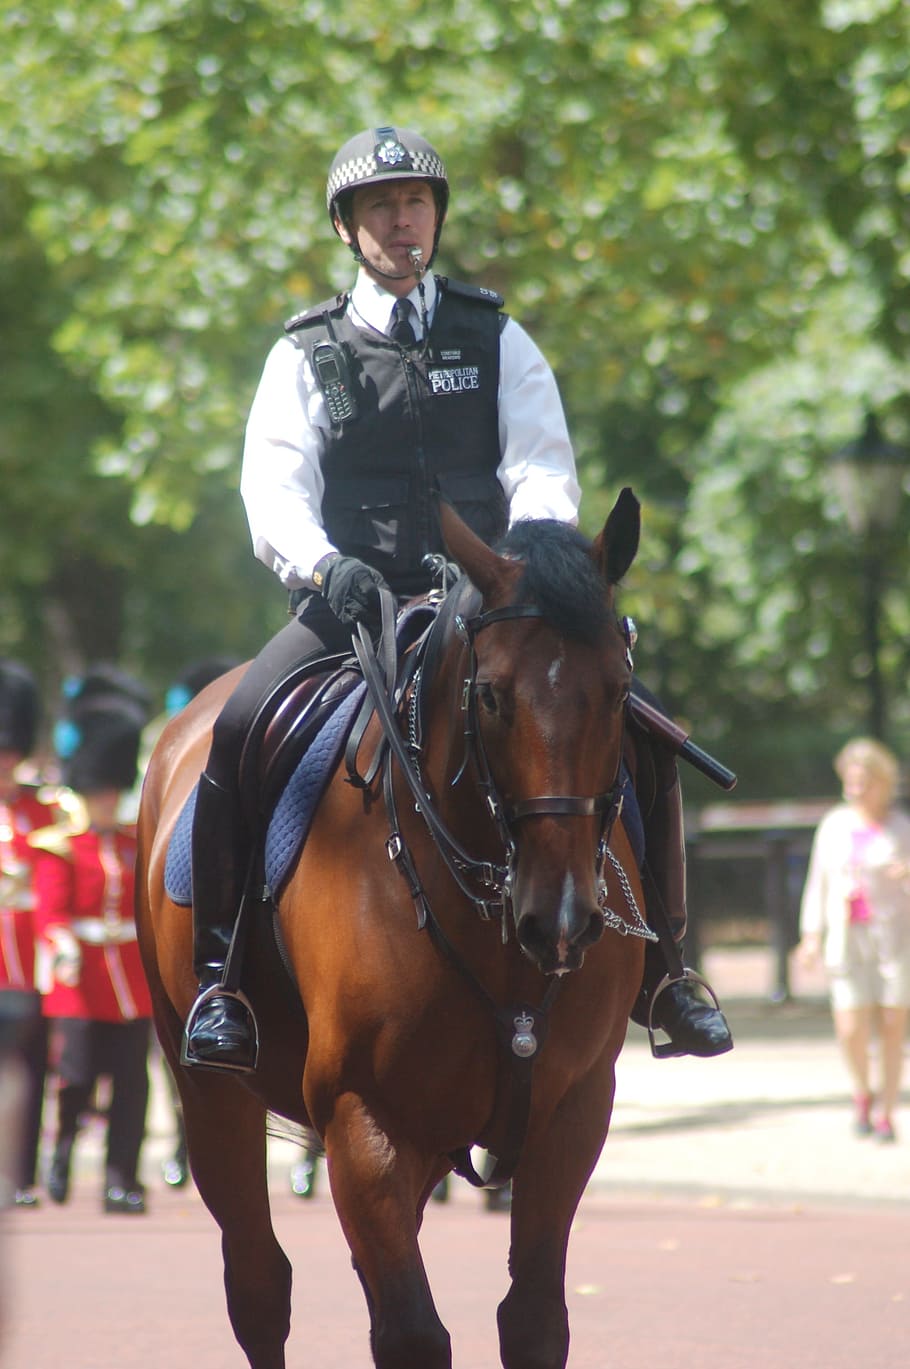 London, Horse, Animals, the horse, animal, landscape, policeman, outdoors, riding, sport